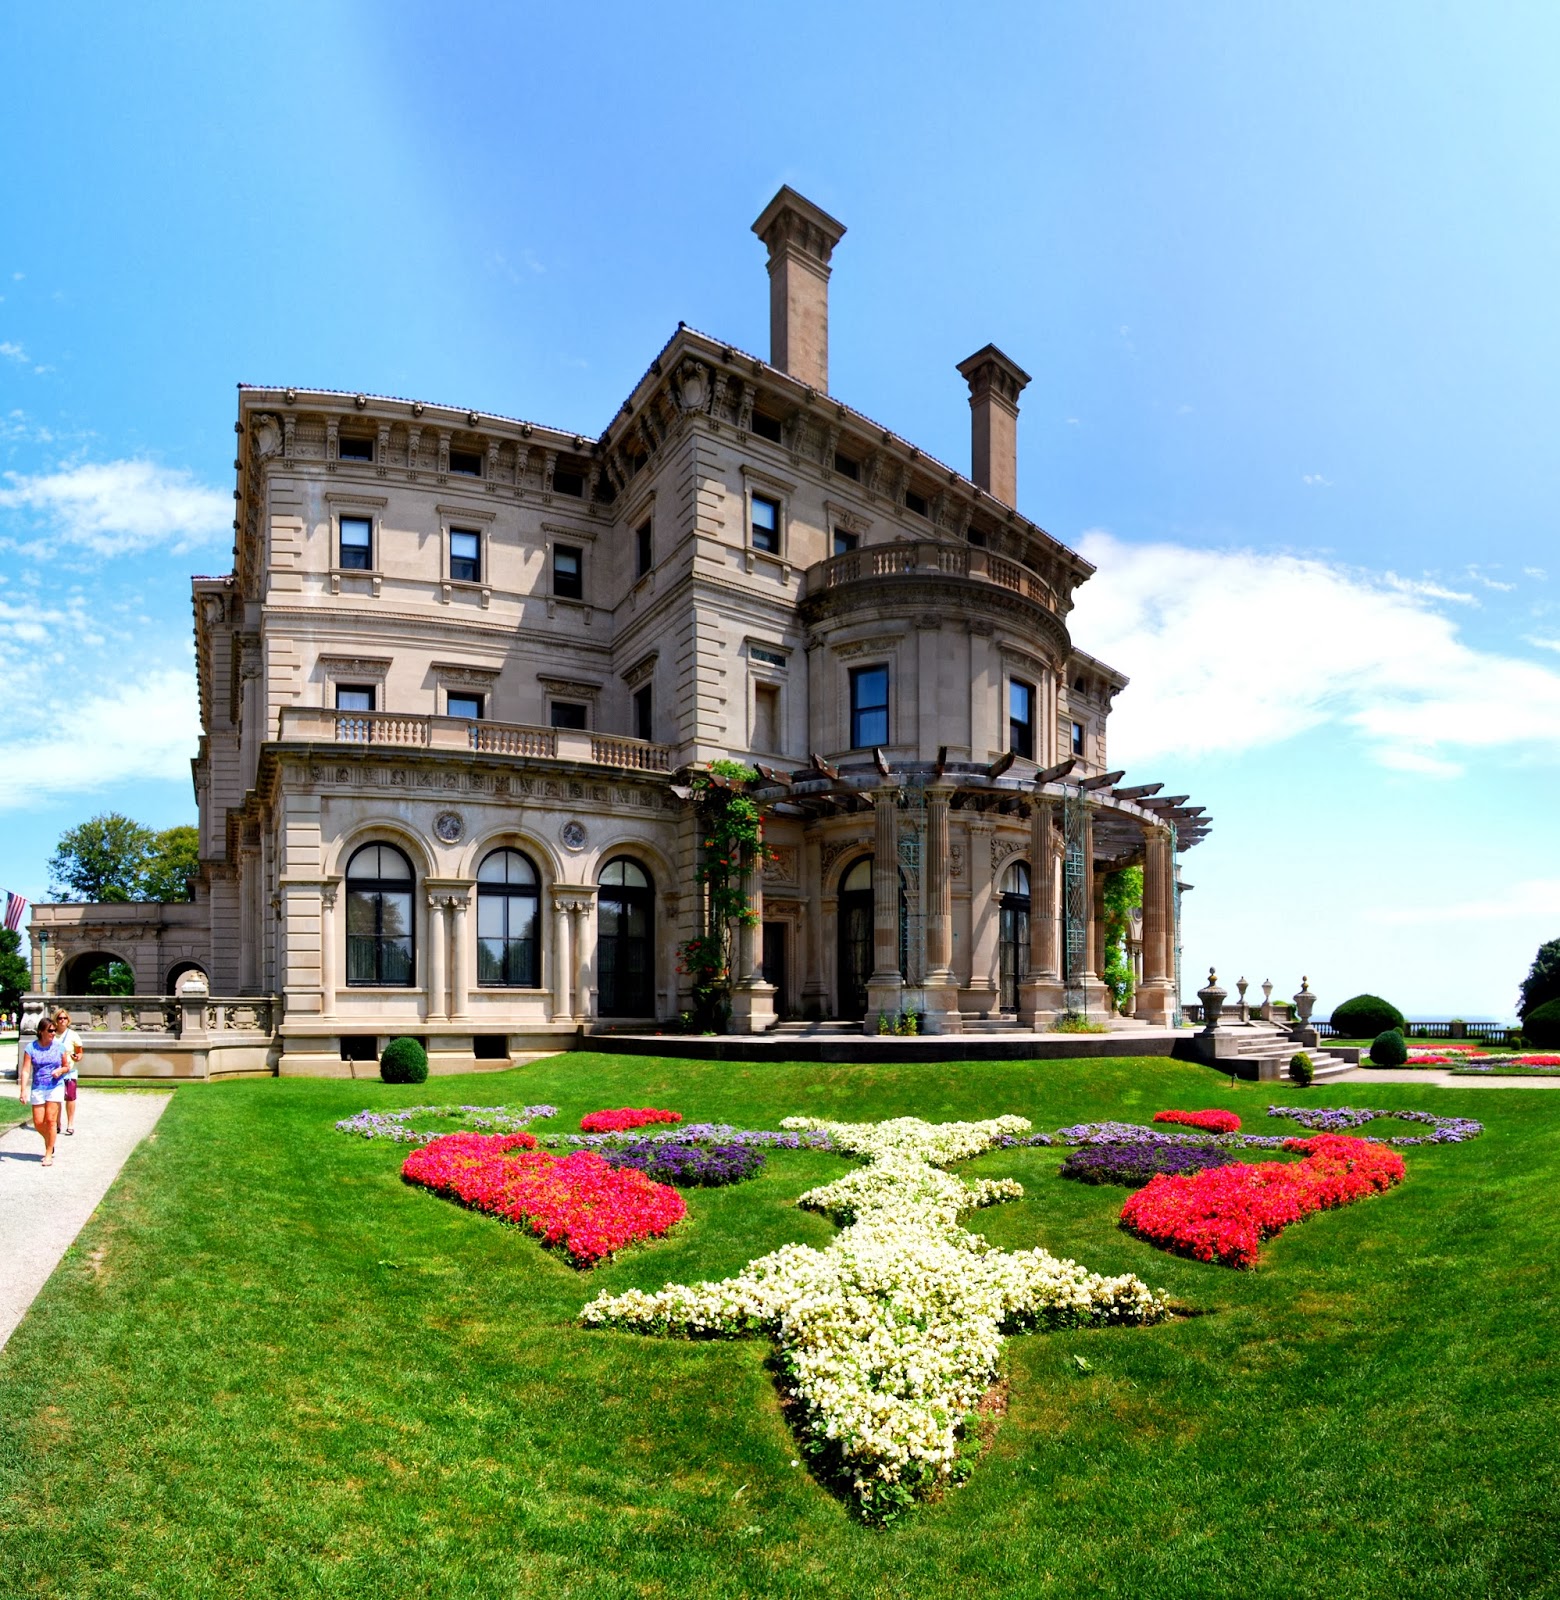 All 90+ Images the breakers mansion in newport rhode island Full HD, 2k, 4k